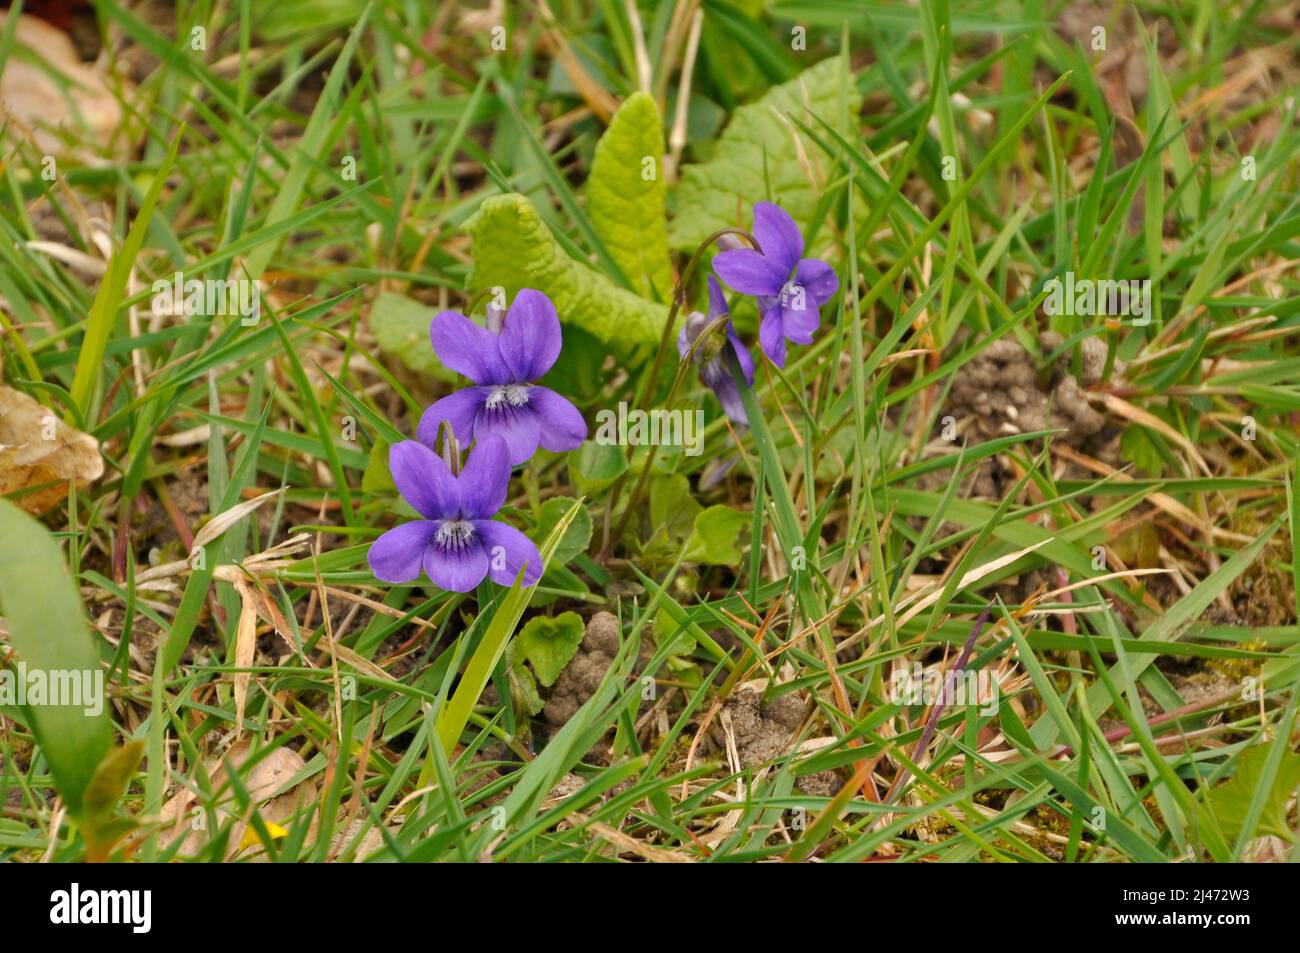 Sweet Violet, Viola odorata, is a species of flowering plant in the viola family, native to Europe and Asia. This small hardy herbaceous perennial is Stock Photo